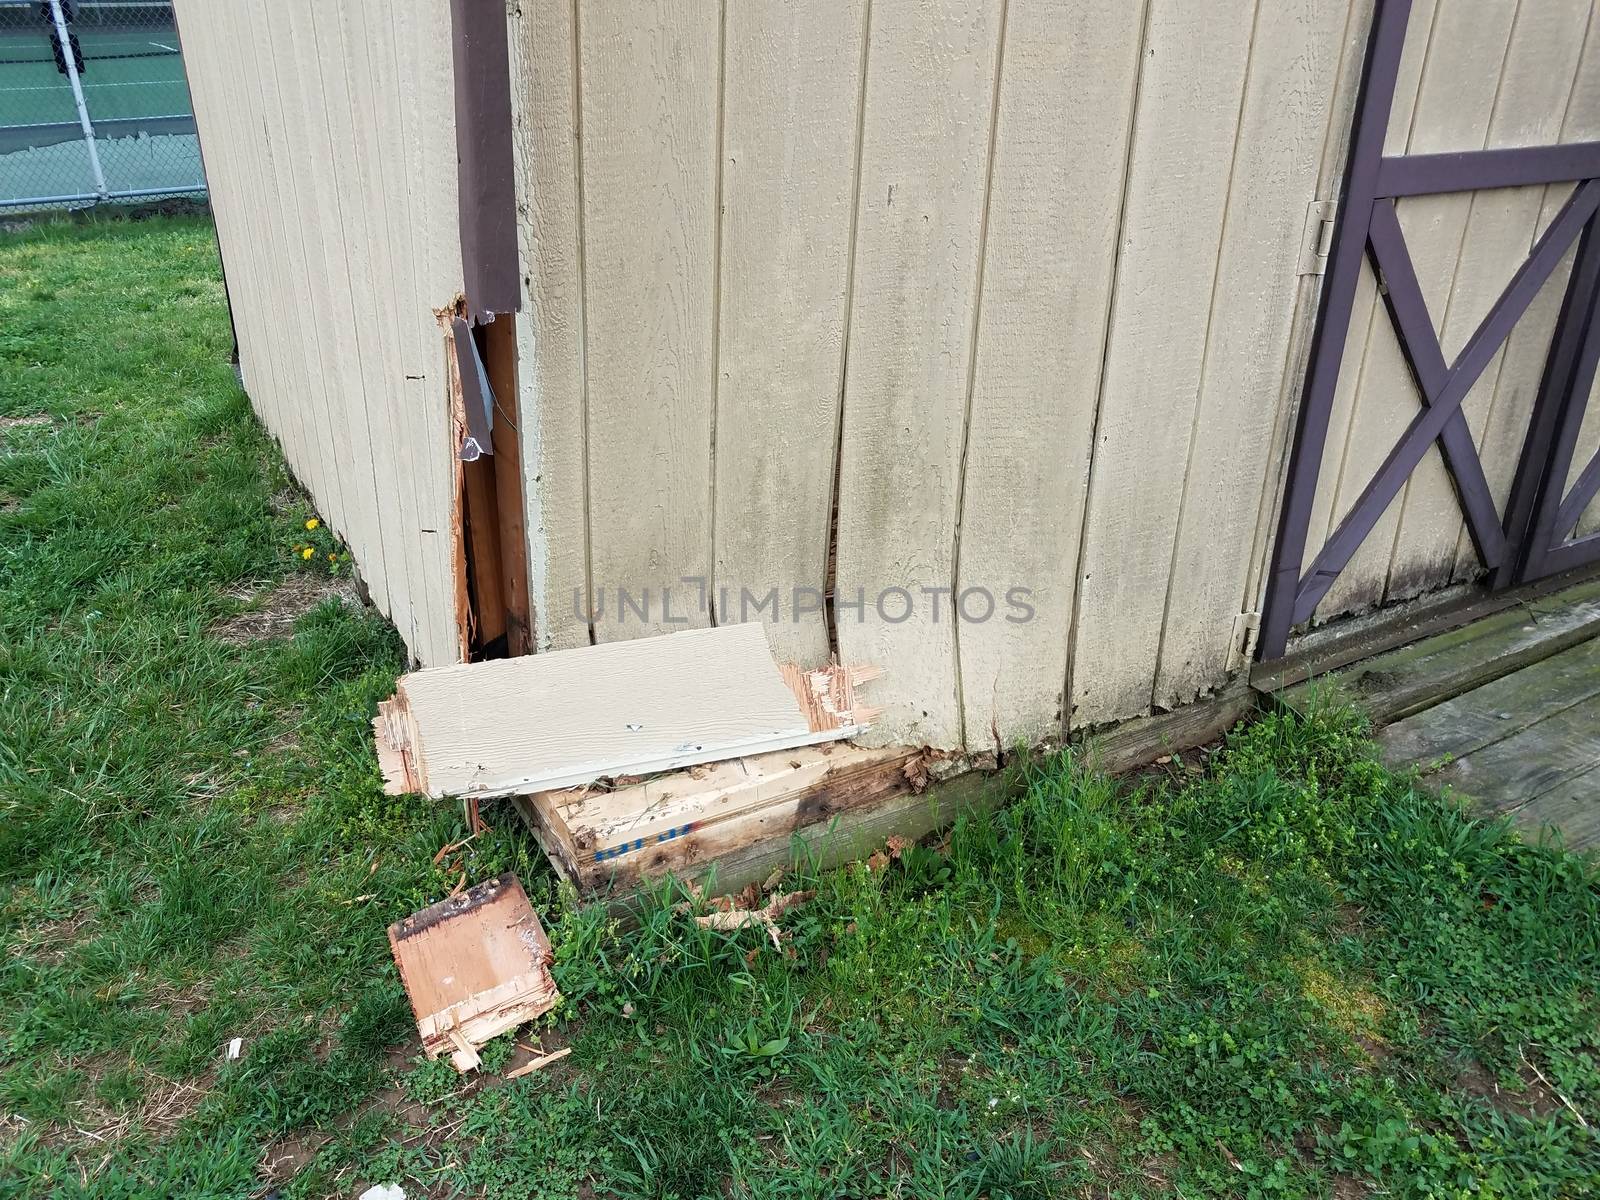 broken wood storage shed or building or structure with damage